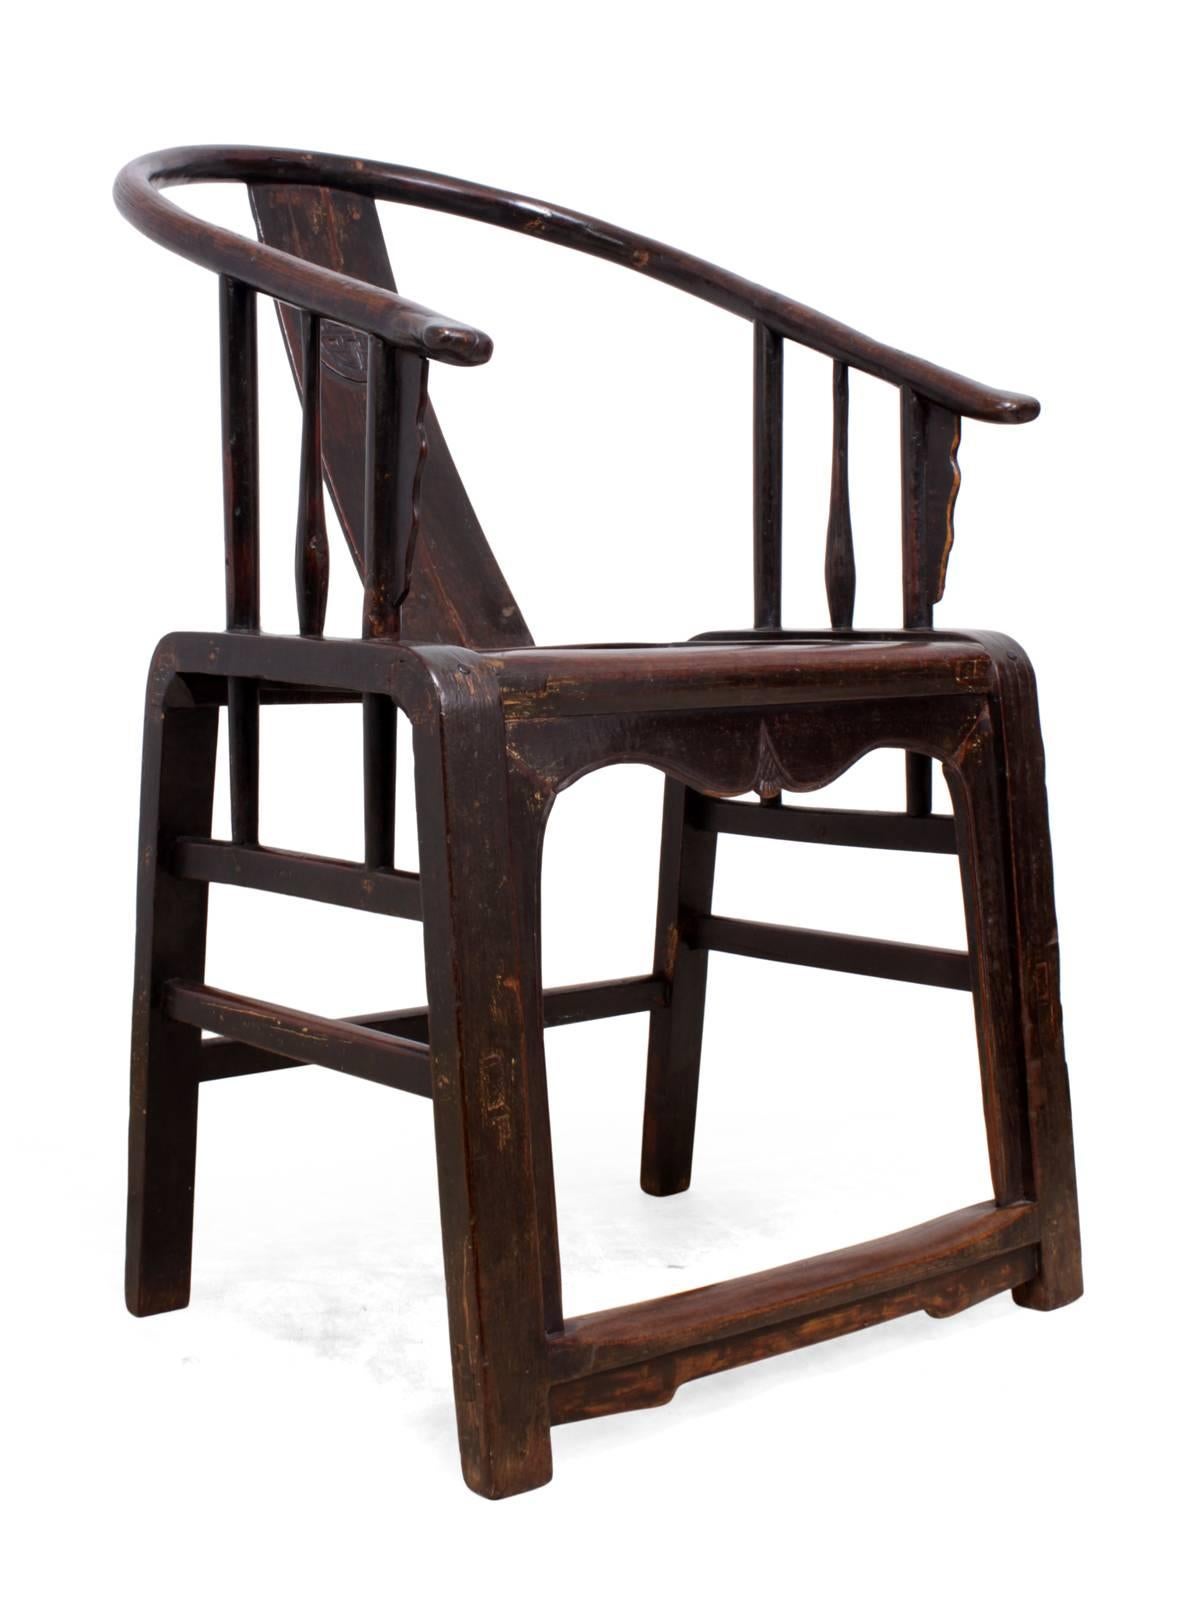 Chinese elm 19th century horseshoe chair
Produced in China in the 19th century of solid elm and hand carved this chair is in very good original condition with age related wear from use

Age: 19th century

Style: Chinese antiques

Material: